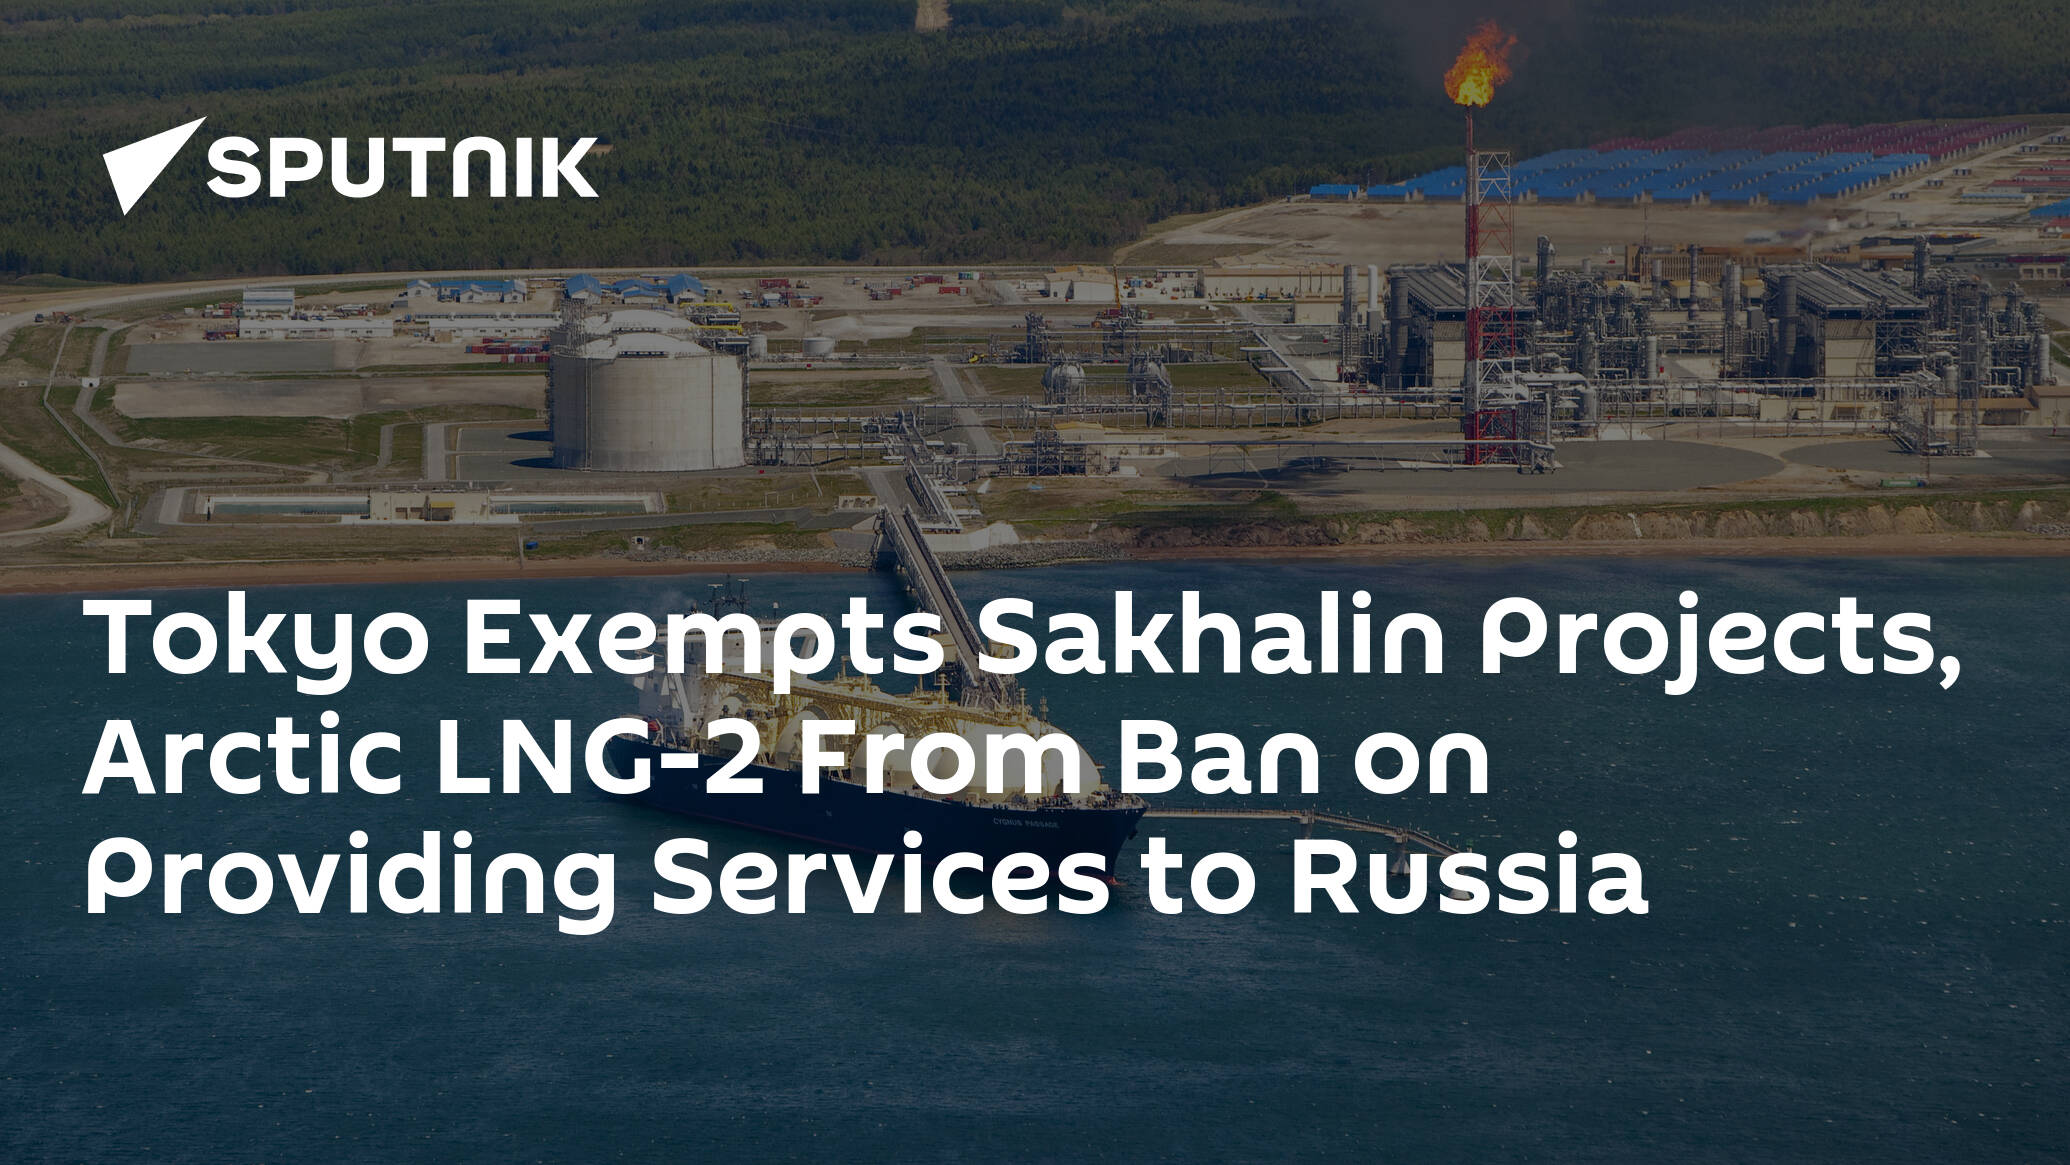 Tokyo Exempts Sakhalin Projects, Arctic LNG-2 From Ban on Providing Services to Russia